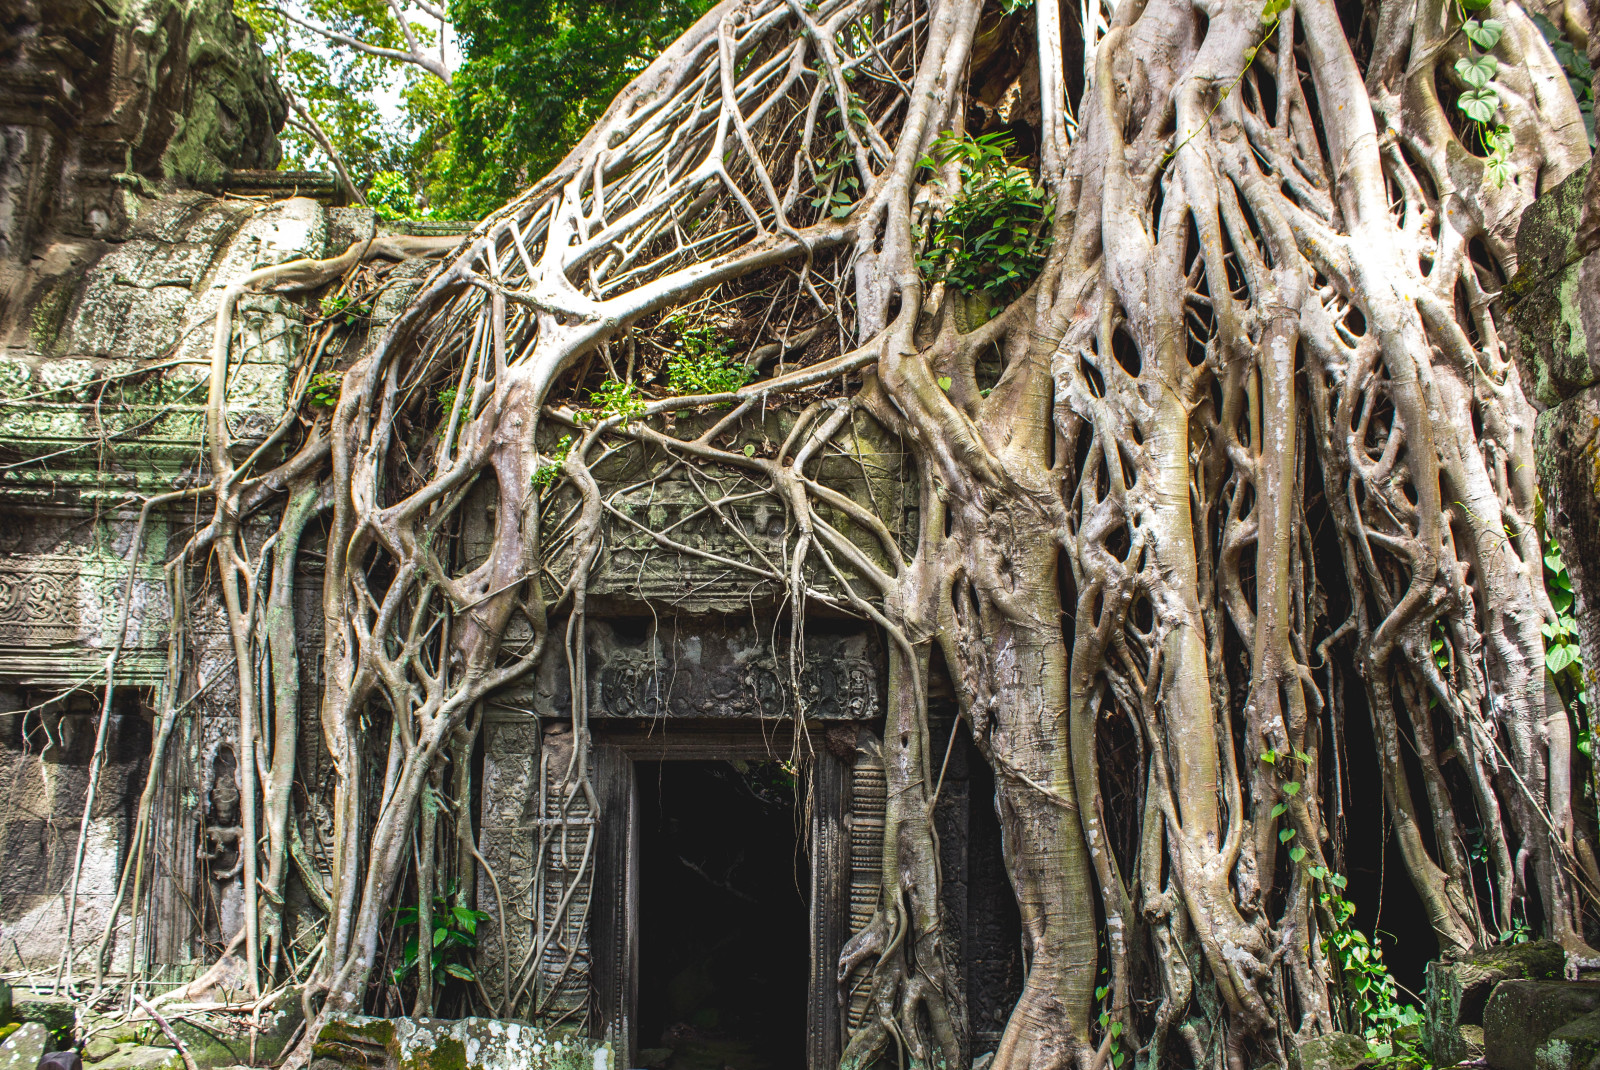 A 3-Day Itinerary of Siem Reap - Day 2: Temples and Khmer culture